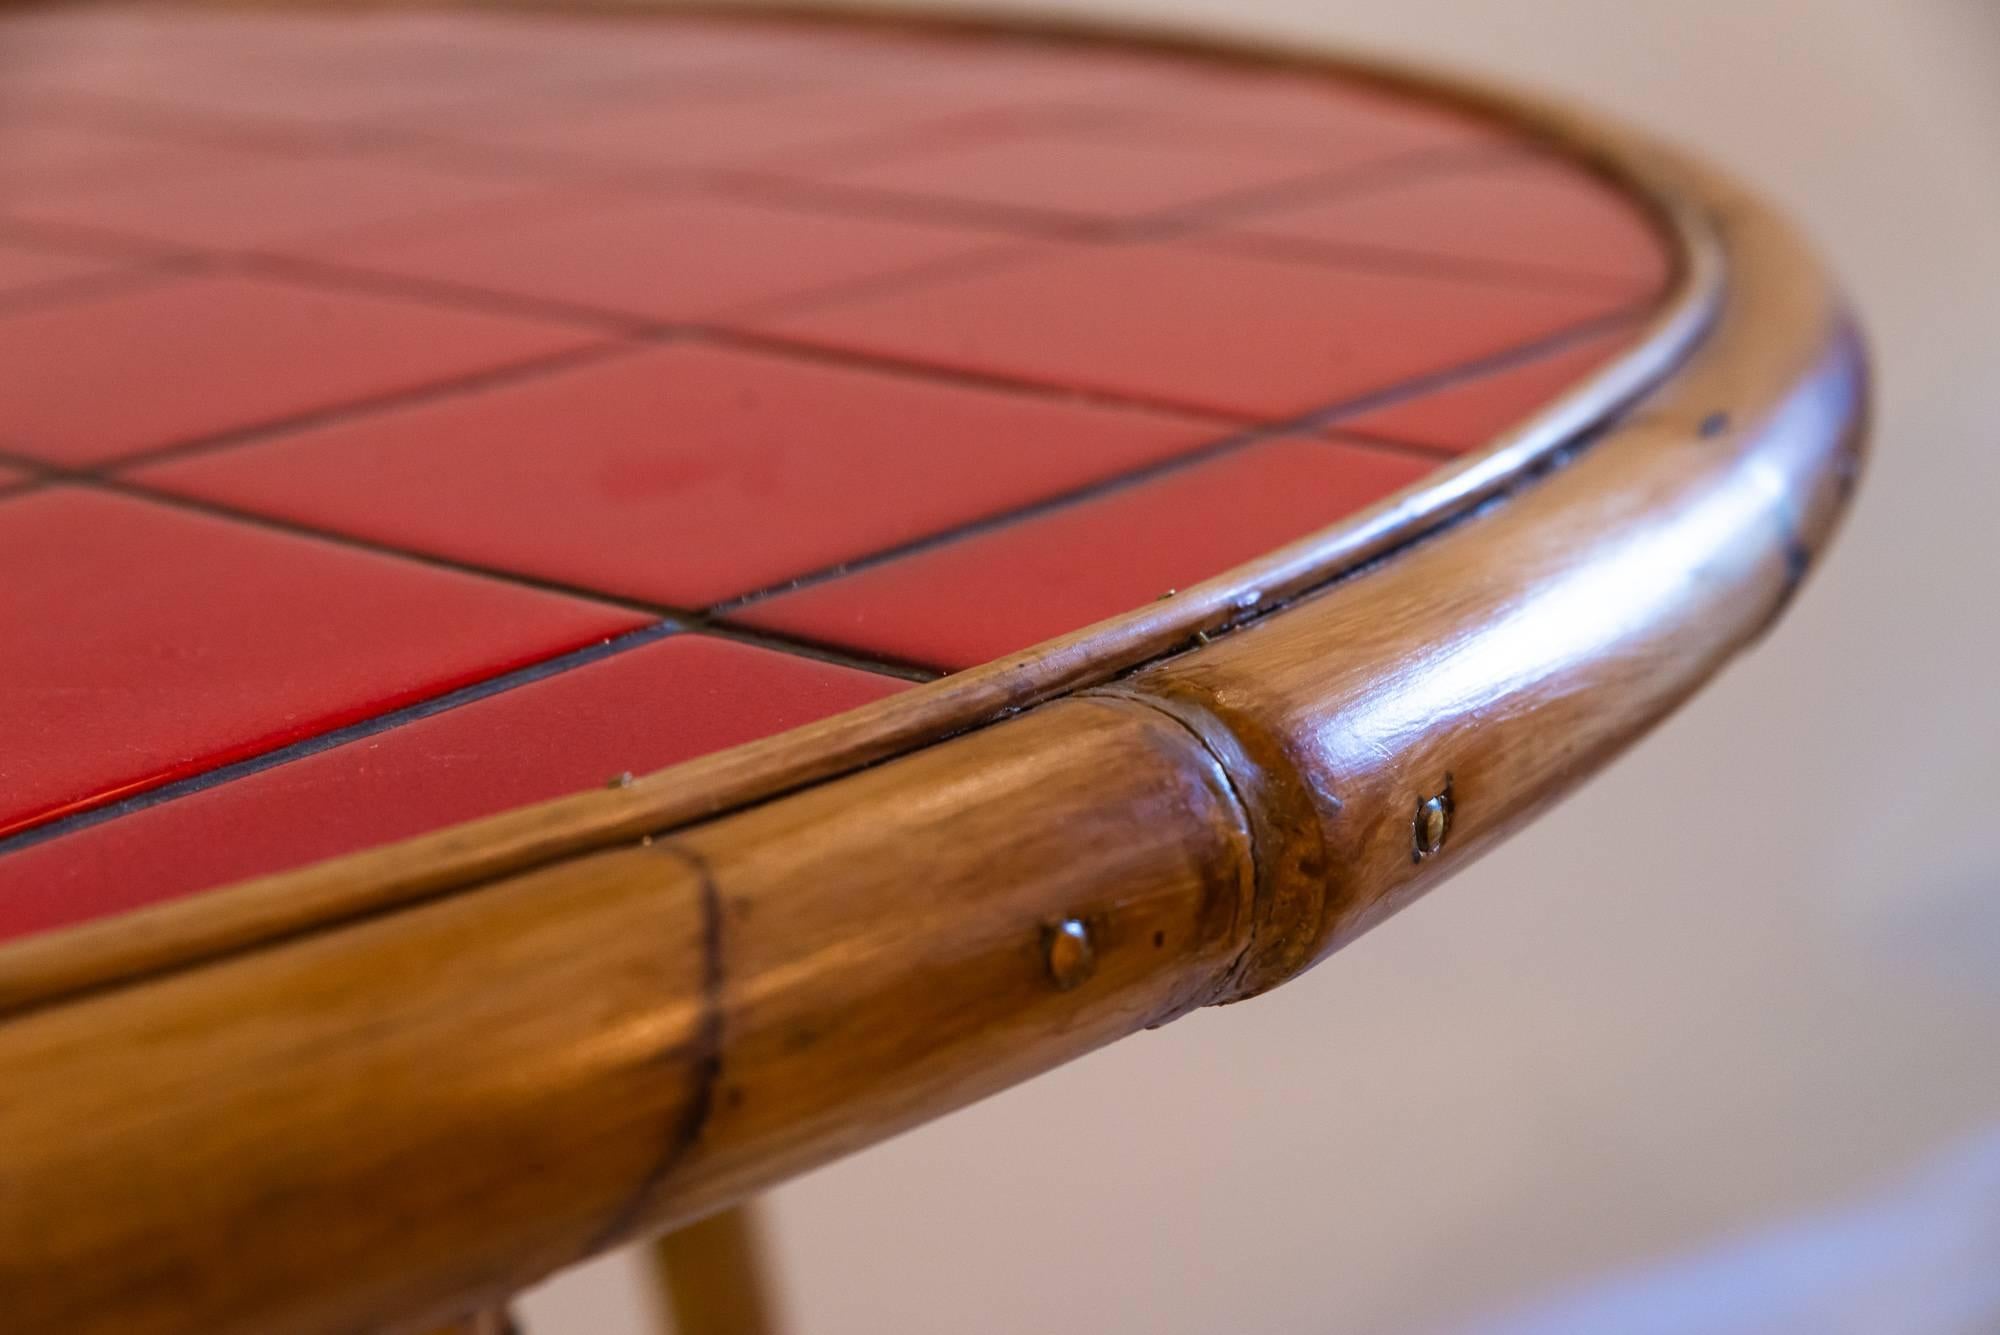 Audoux-Minet, dining table,
bamboo and red ceramic,
Vallauris
circa 1960, France.
Measures: Height 70 cm, diameter 1m40.